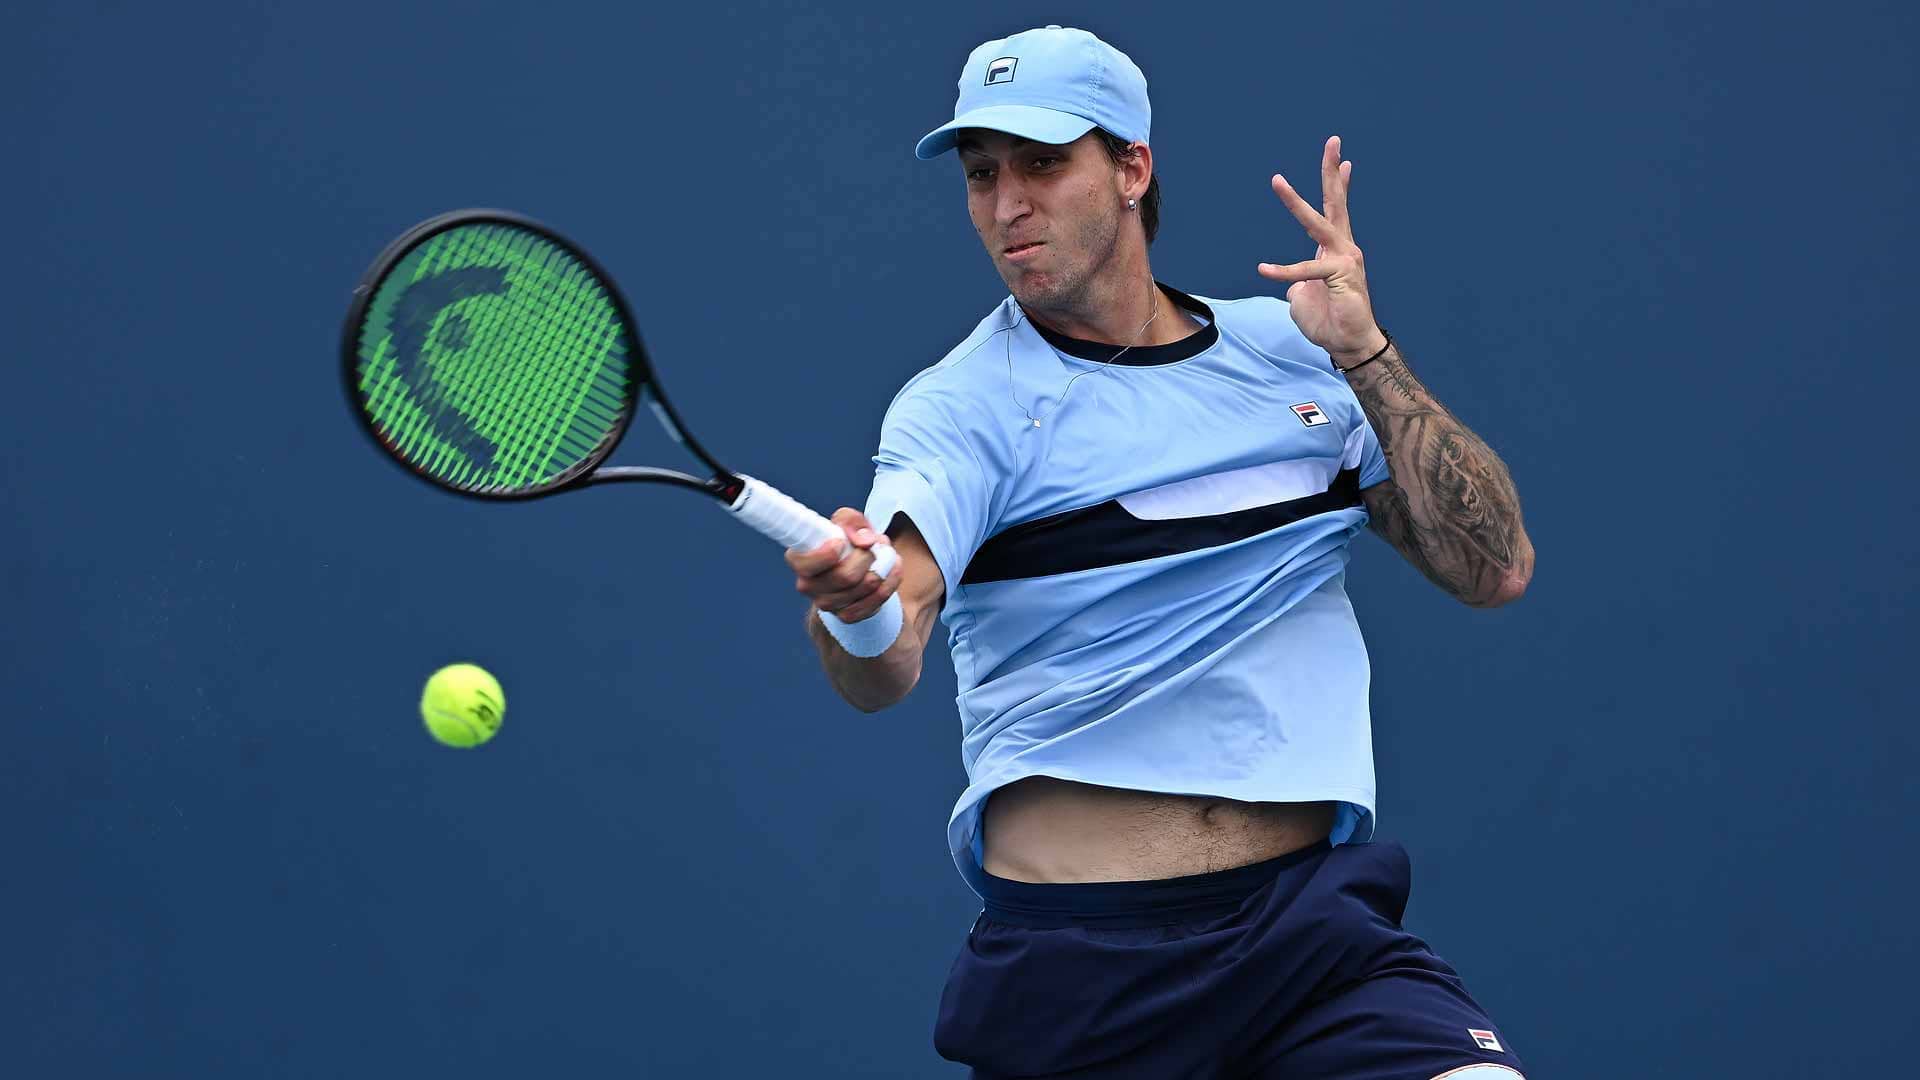 Felipe Meligeni Alves reached a career-high No. 129 in the Pepperstone ATP Rankings in June.